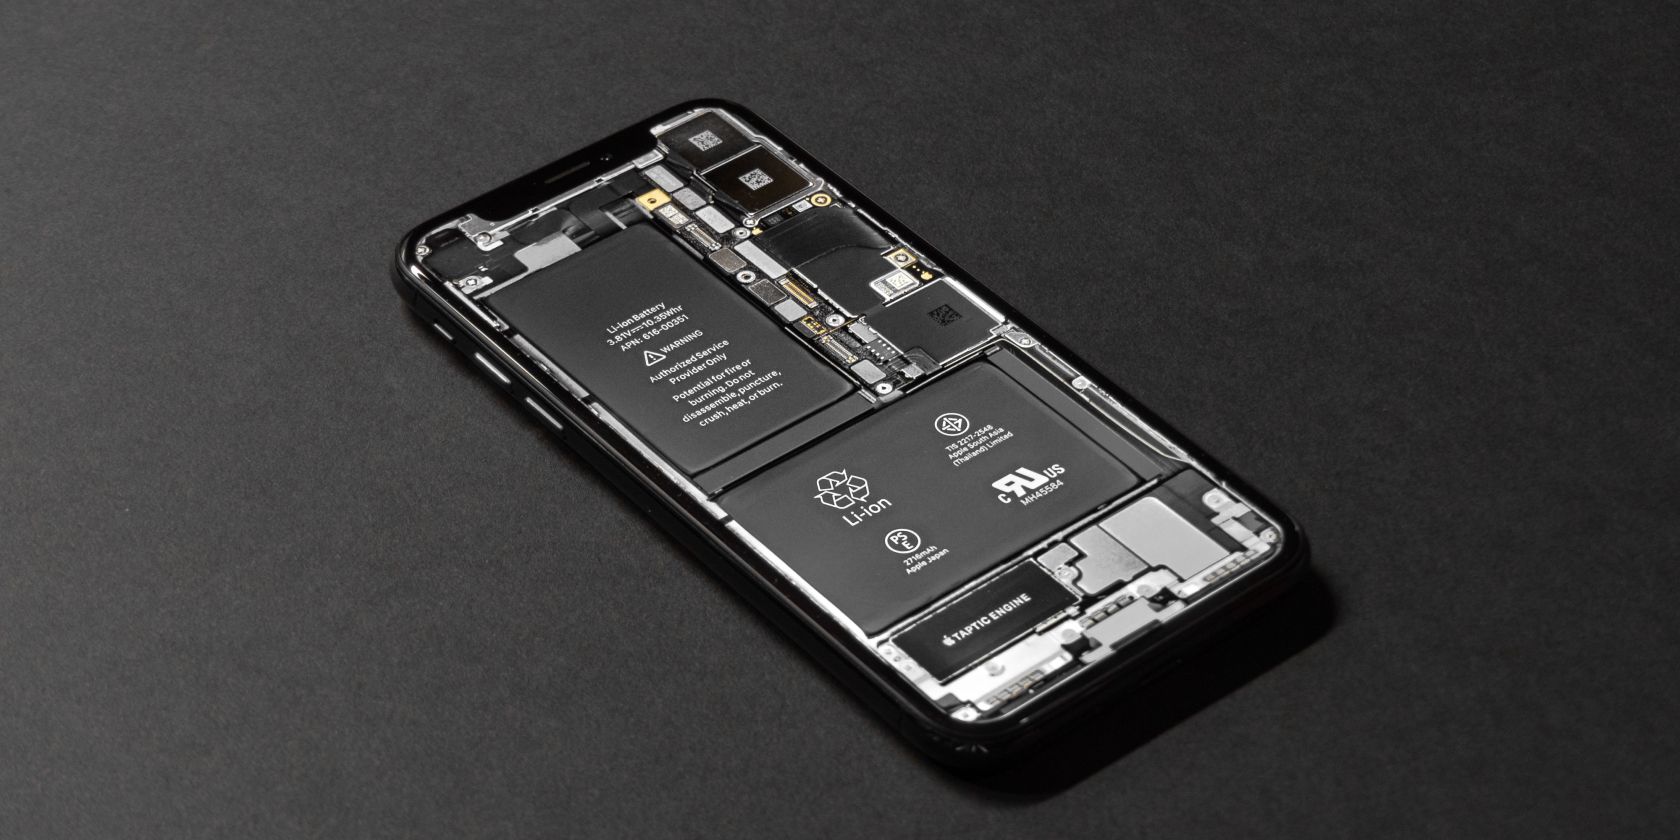 iPhone with internals showing